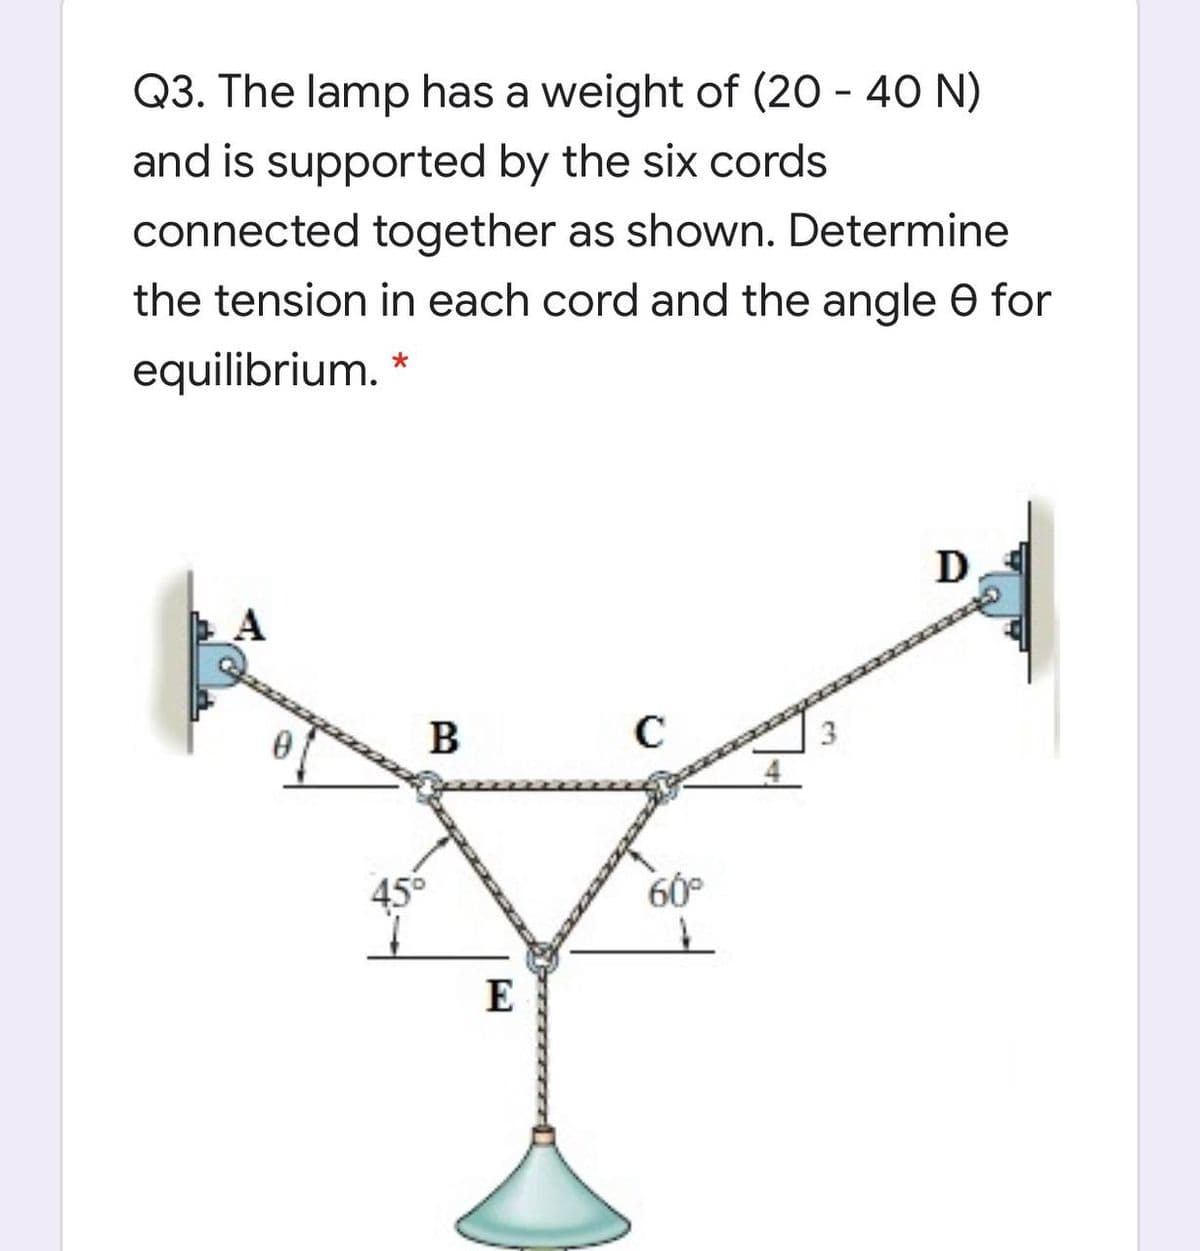 Q3. The lamp has a weight of (20 - 40 N)
and is supported by the six cords
connected together as shown. Determine
the tension in each cord and the angle O for
equilibrium. *
В
3
456
60°
E
